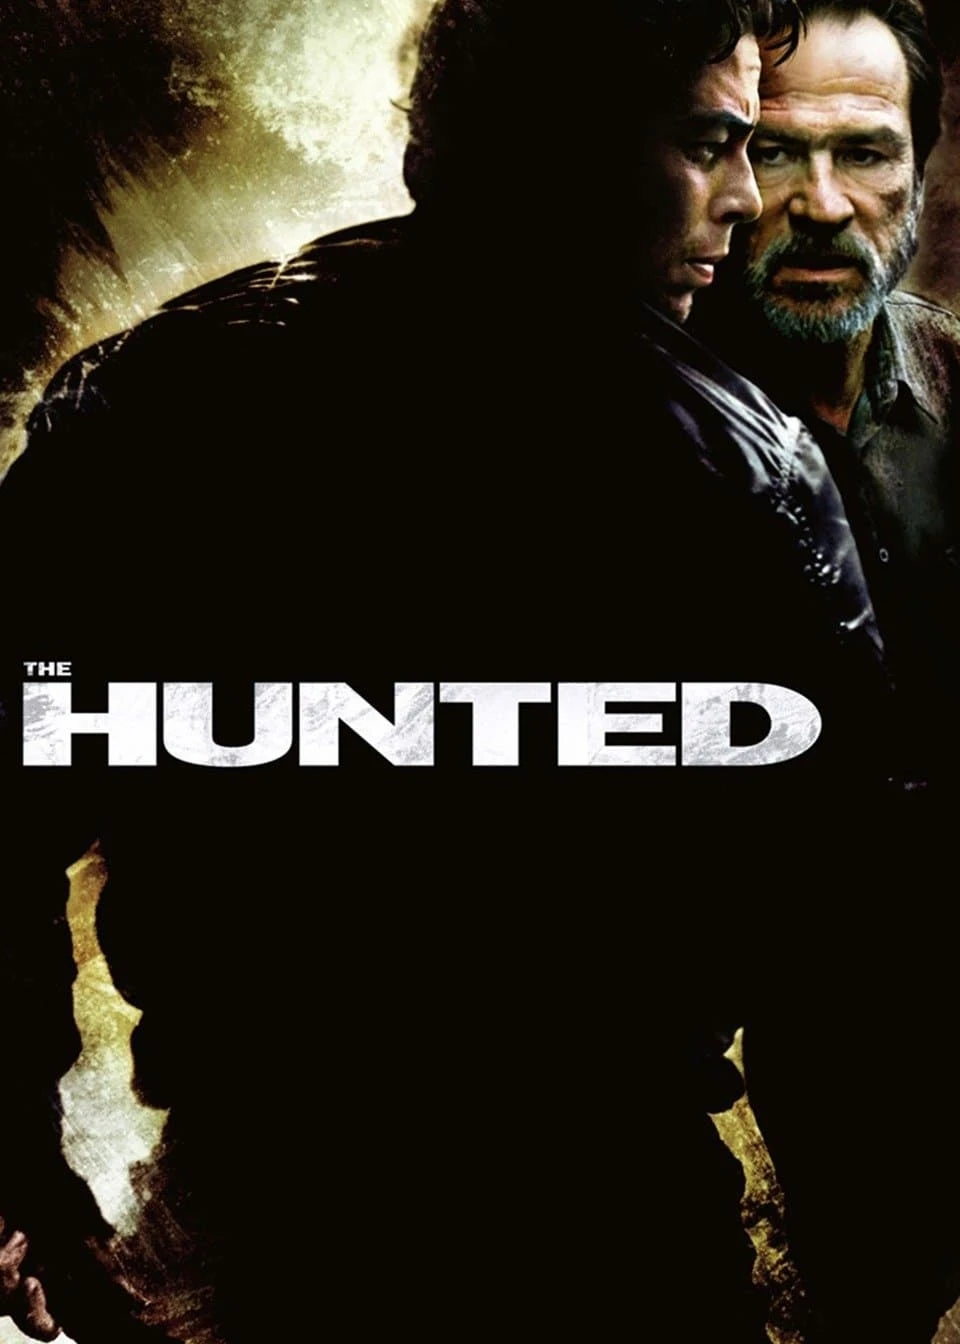 The Hunted | The Hunted (2003)